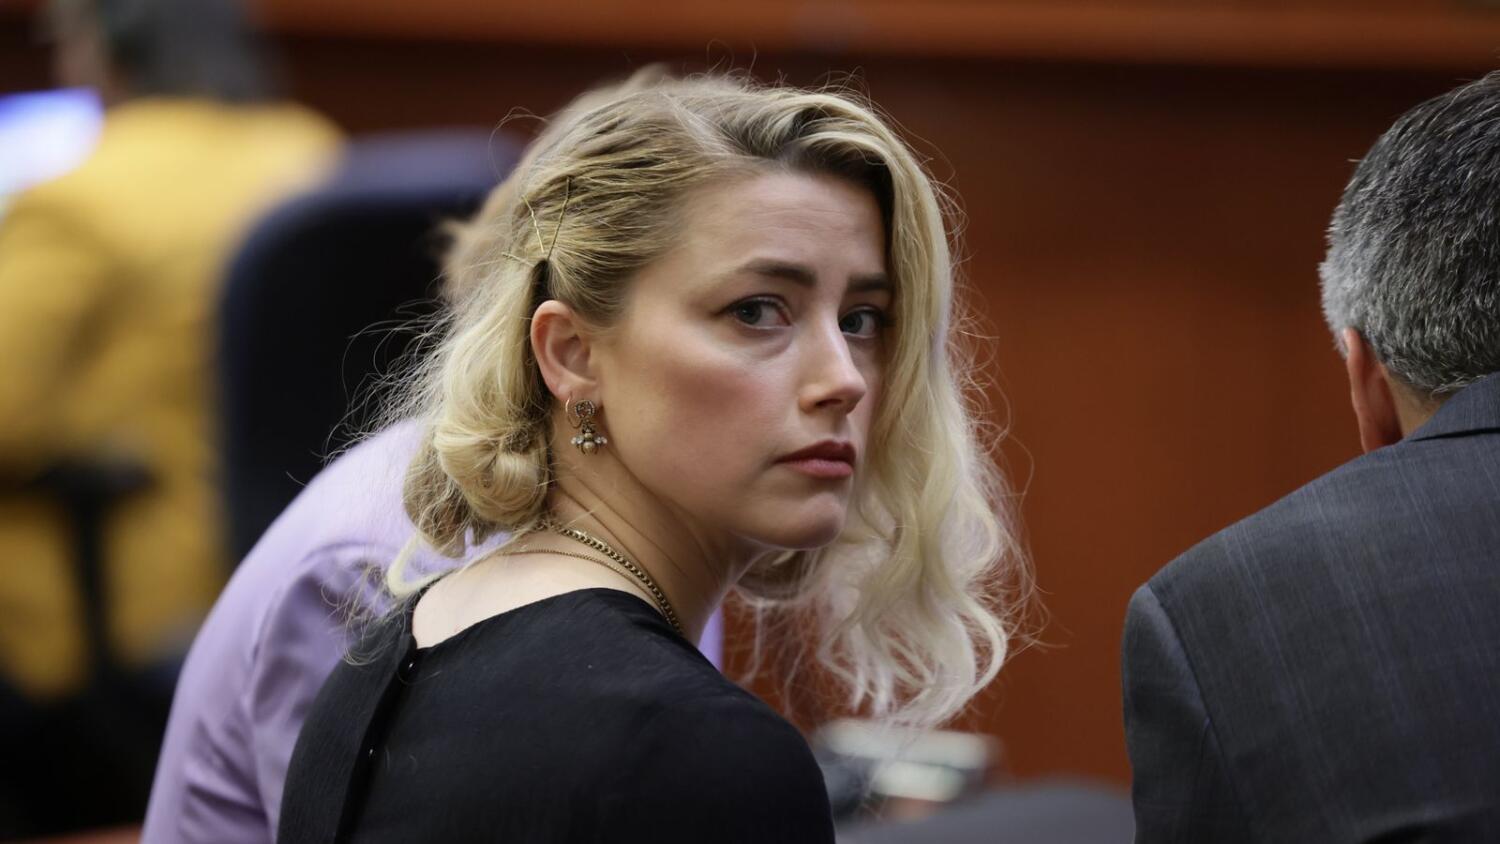 Amber Heard intends to appeal against Johnny Depp's defamation verdict